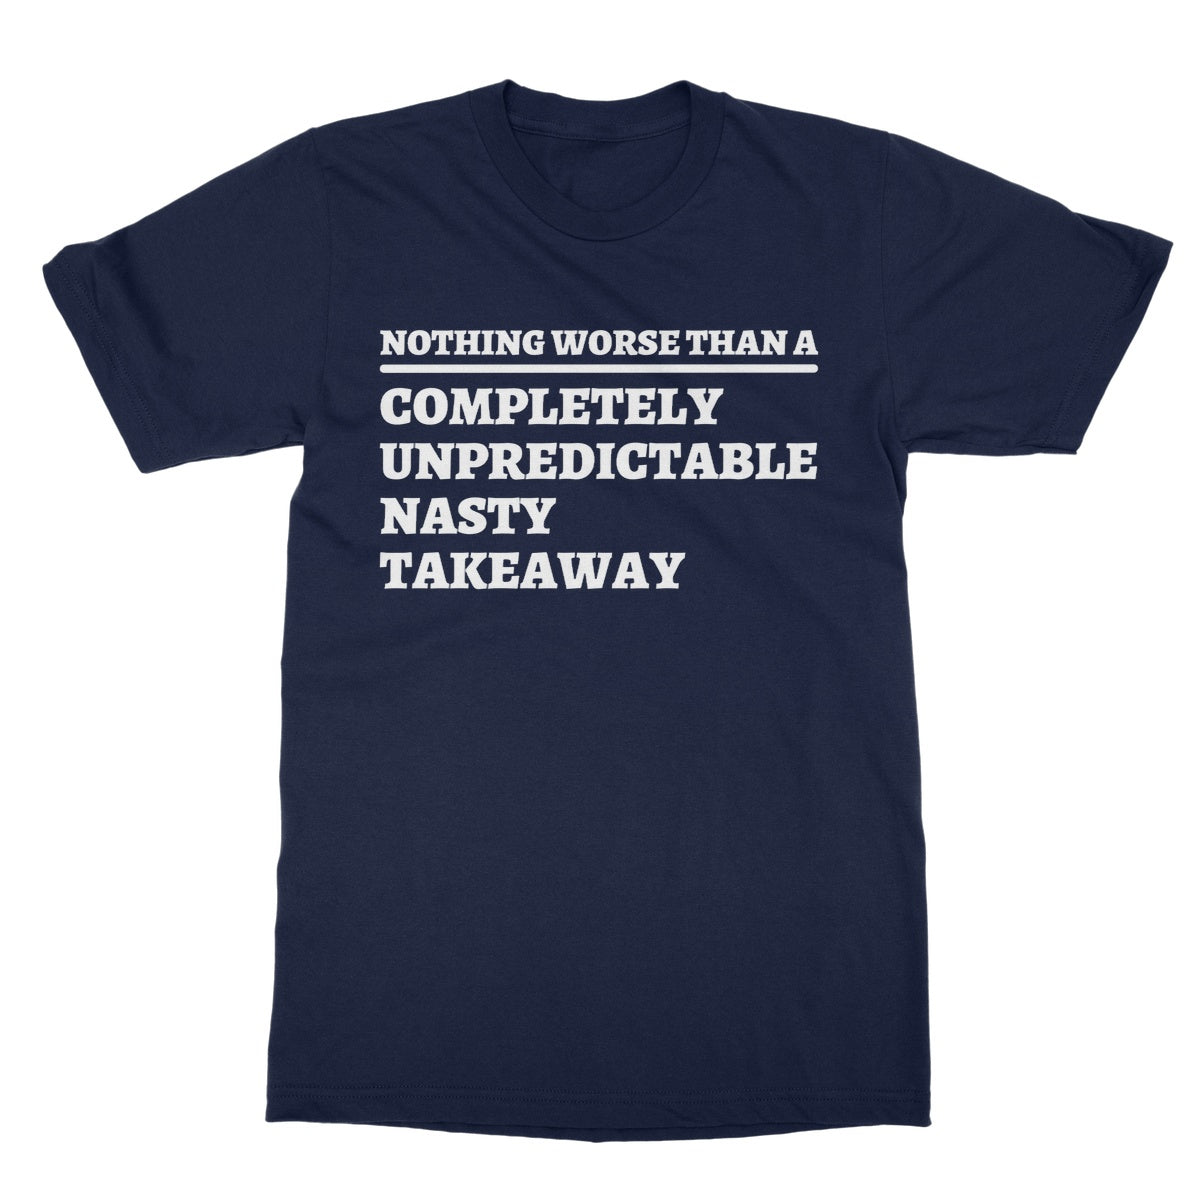 completely unreliable nasty takeaway t shirt navy